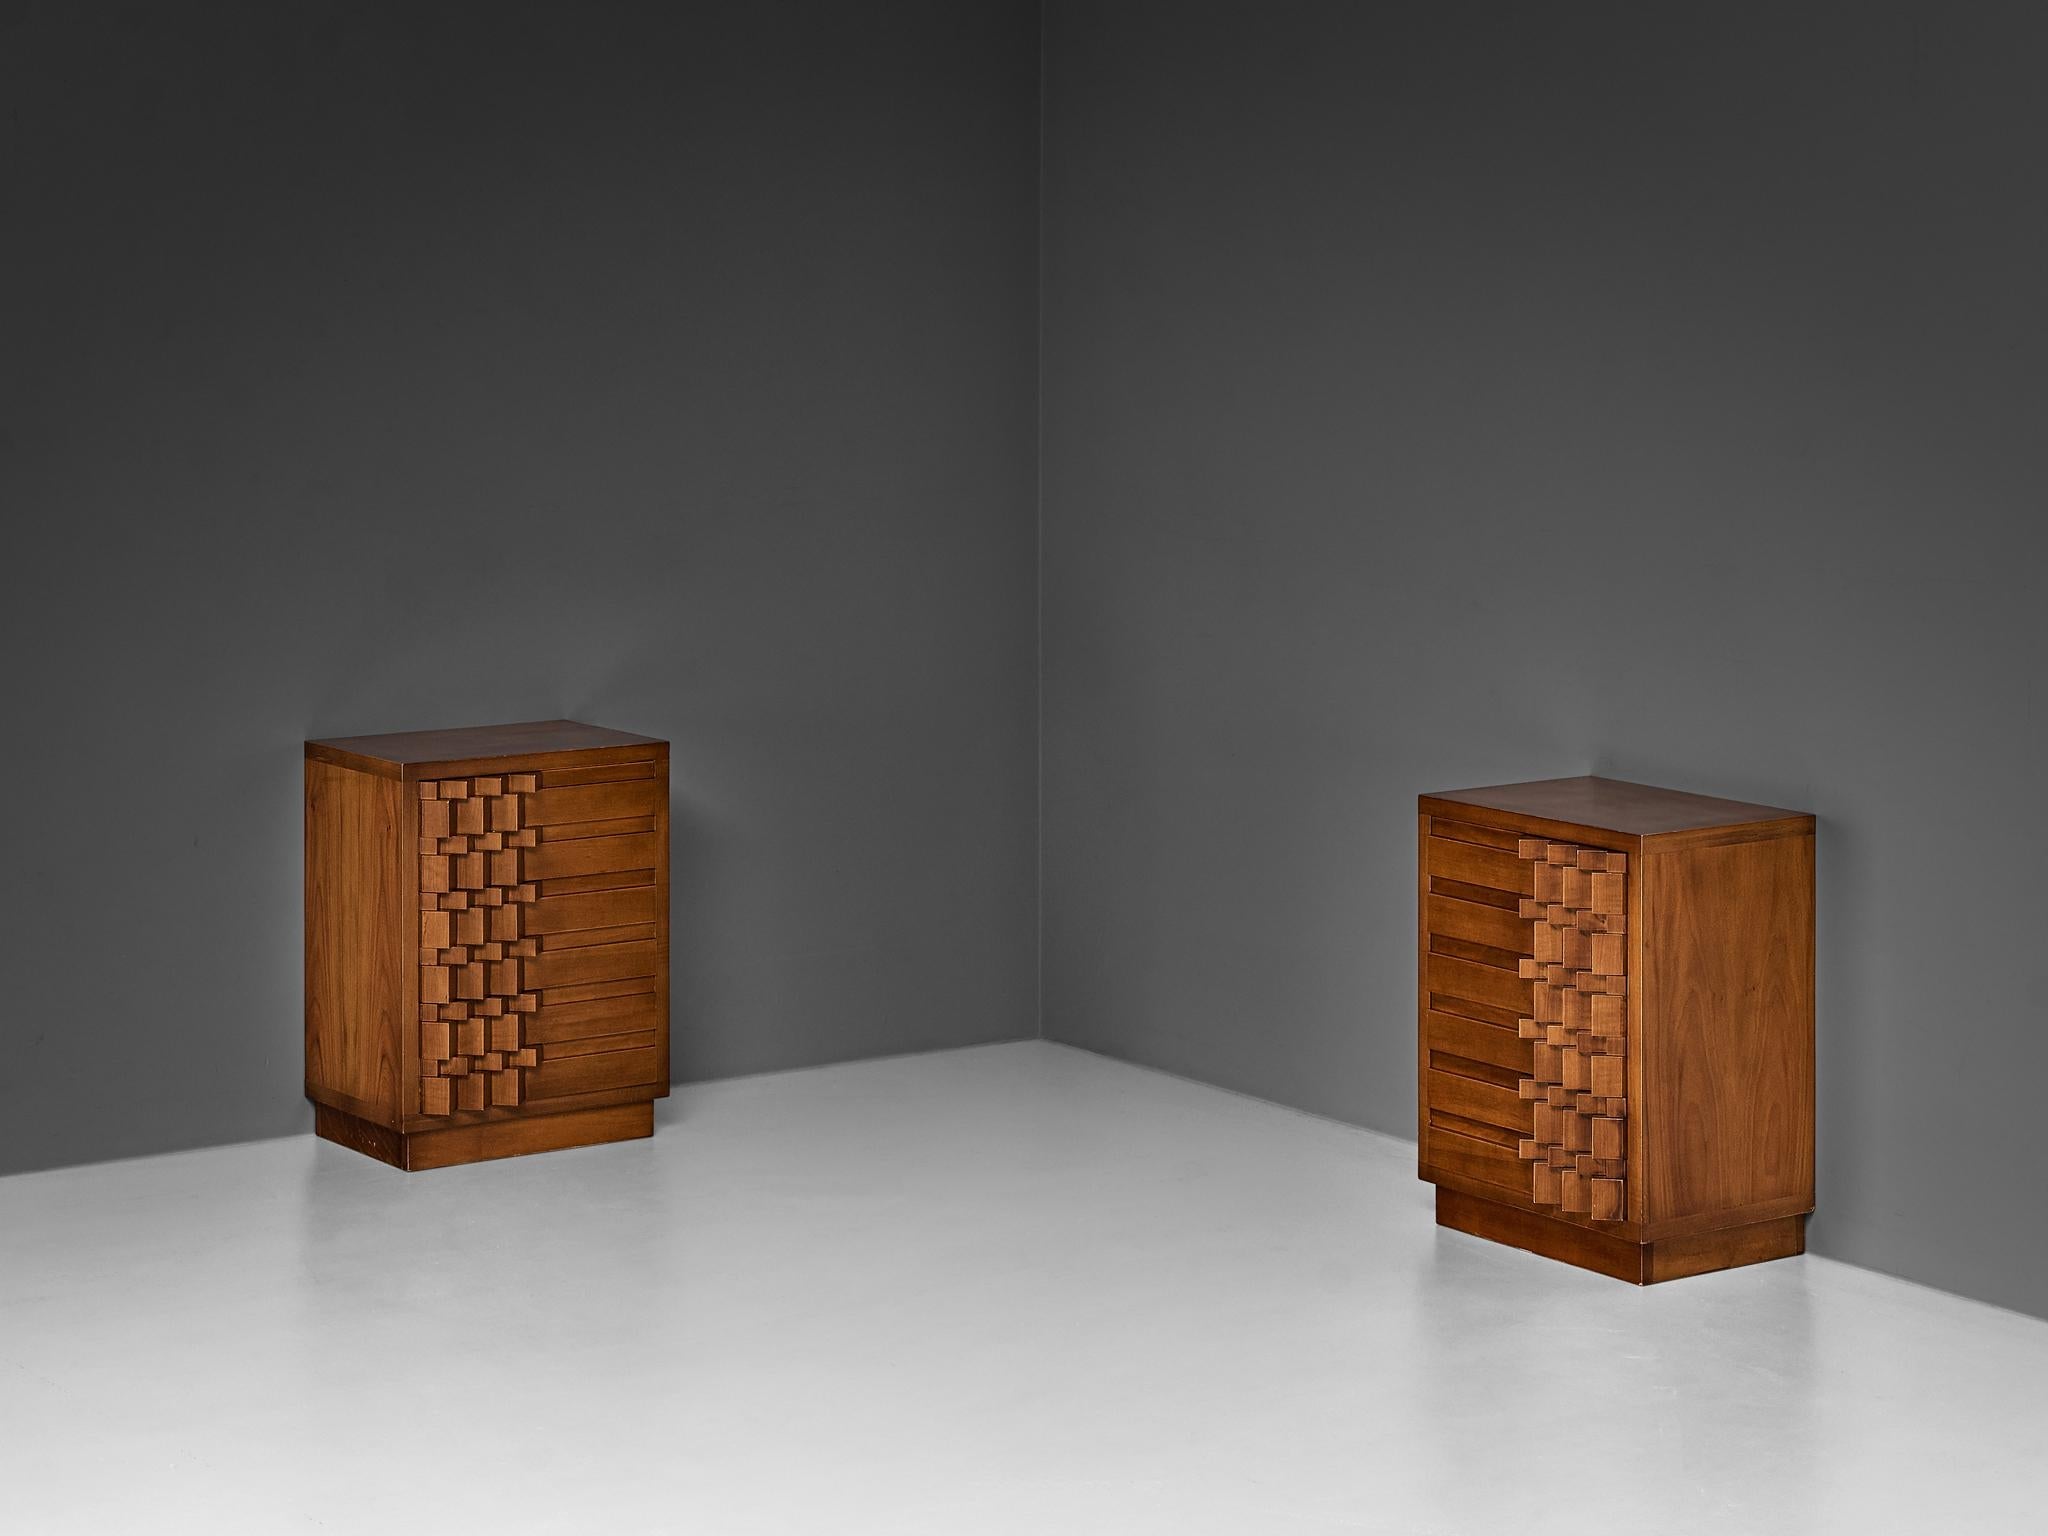 Luciano Frigerio 'Diamante' Pair of Bed Tables with Cubist Graphic Front